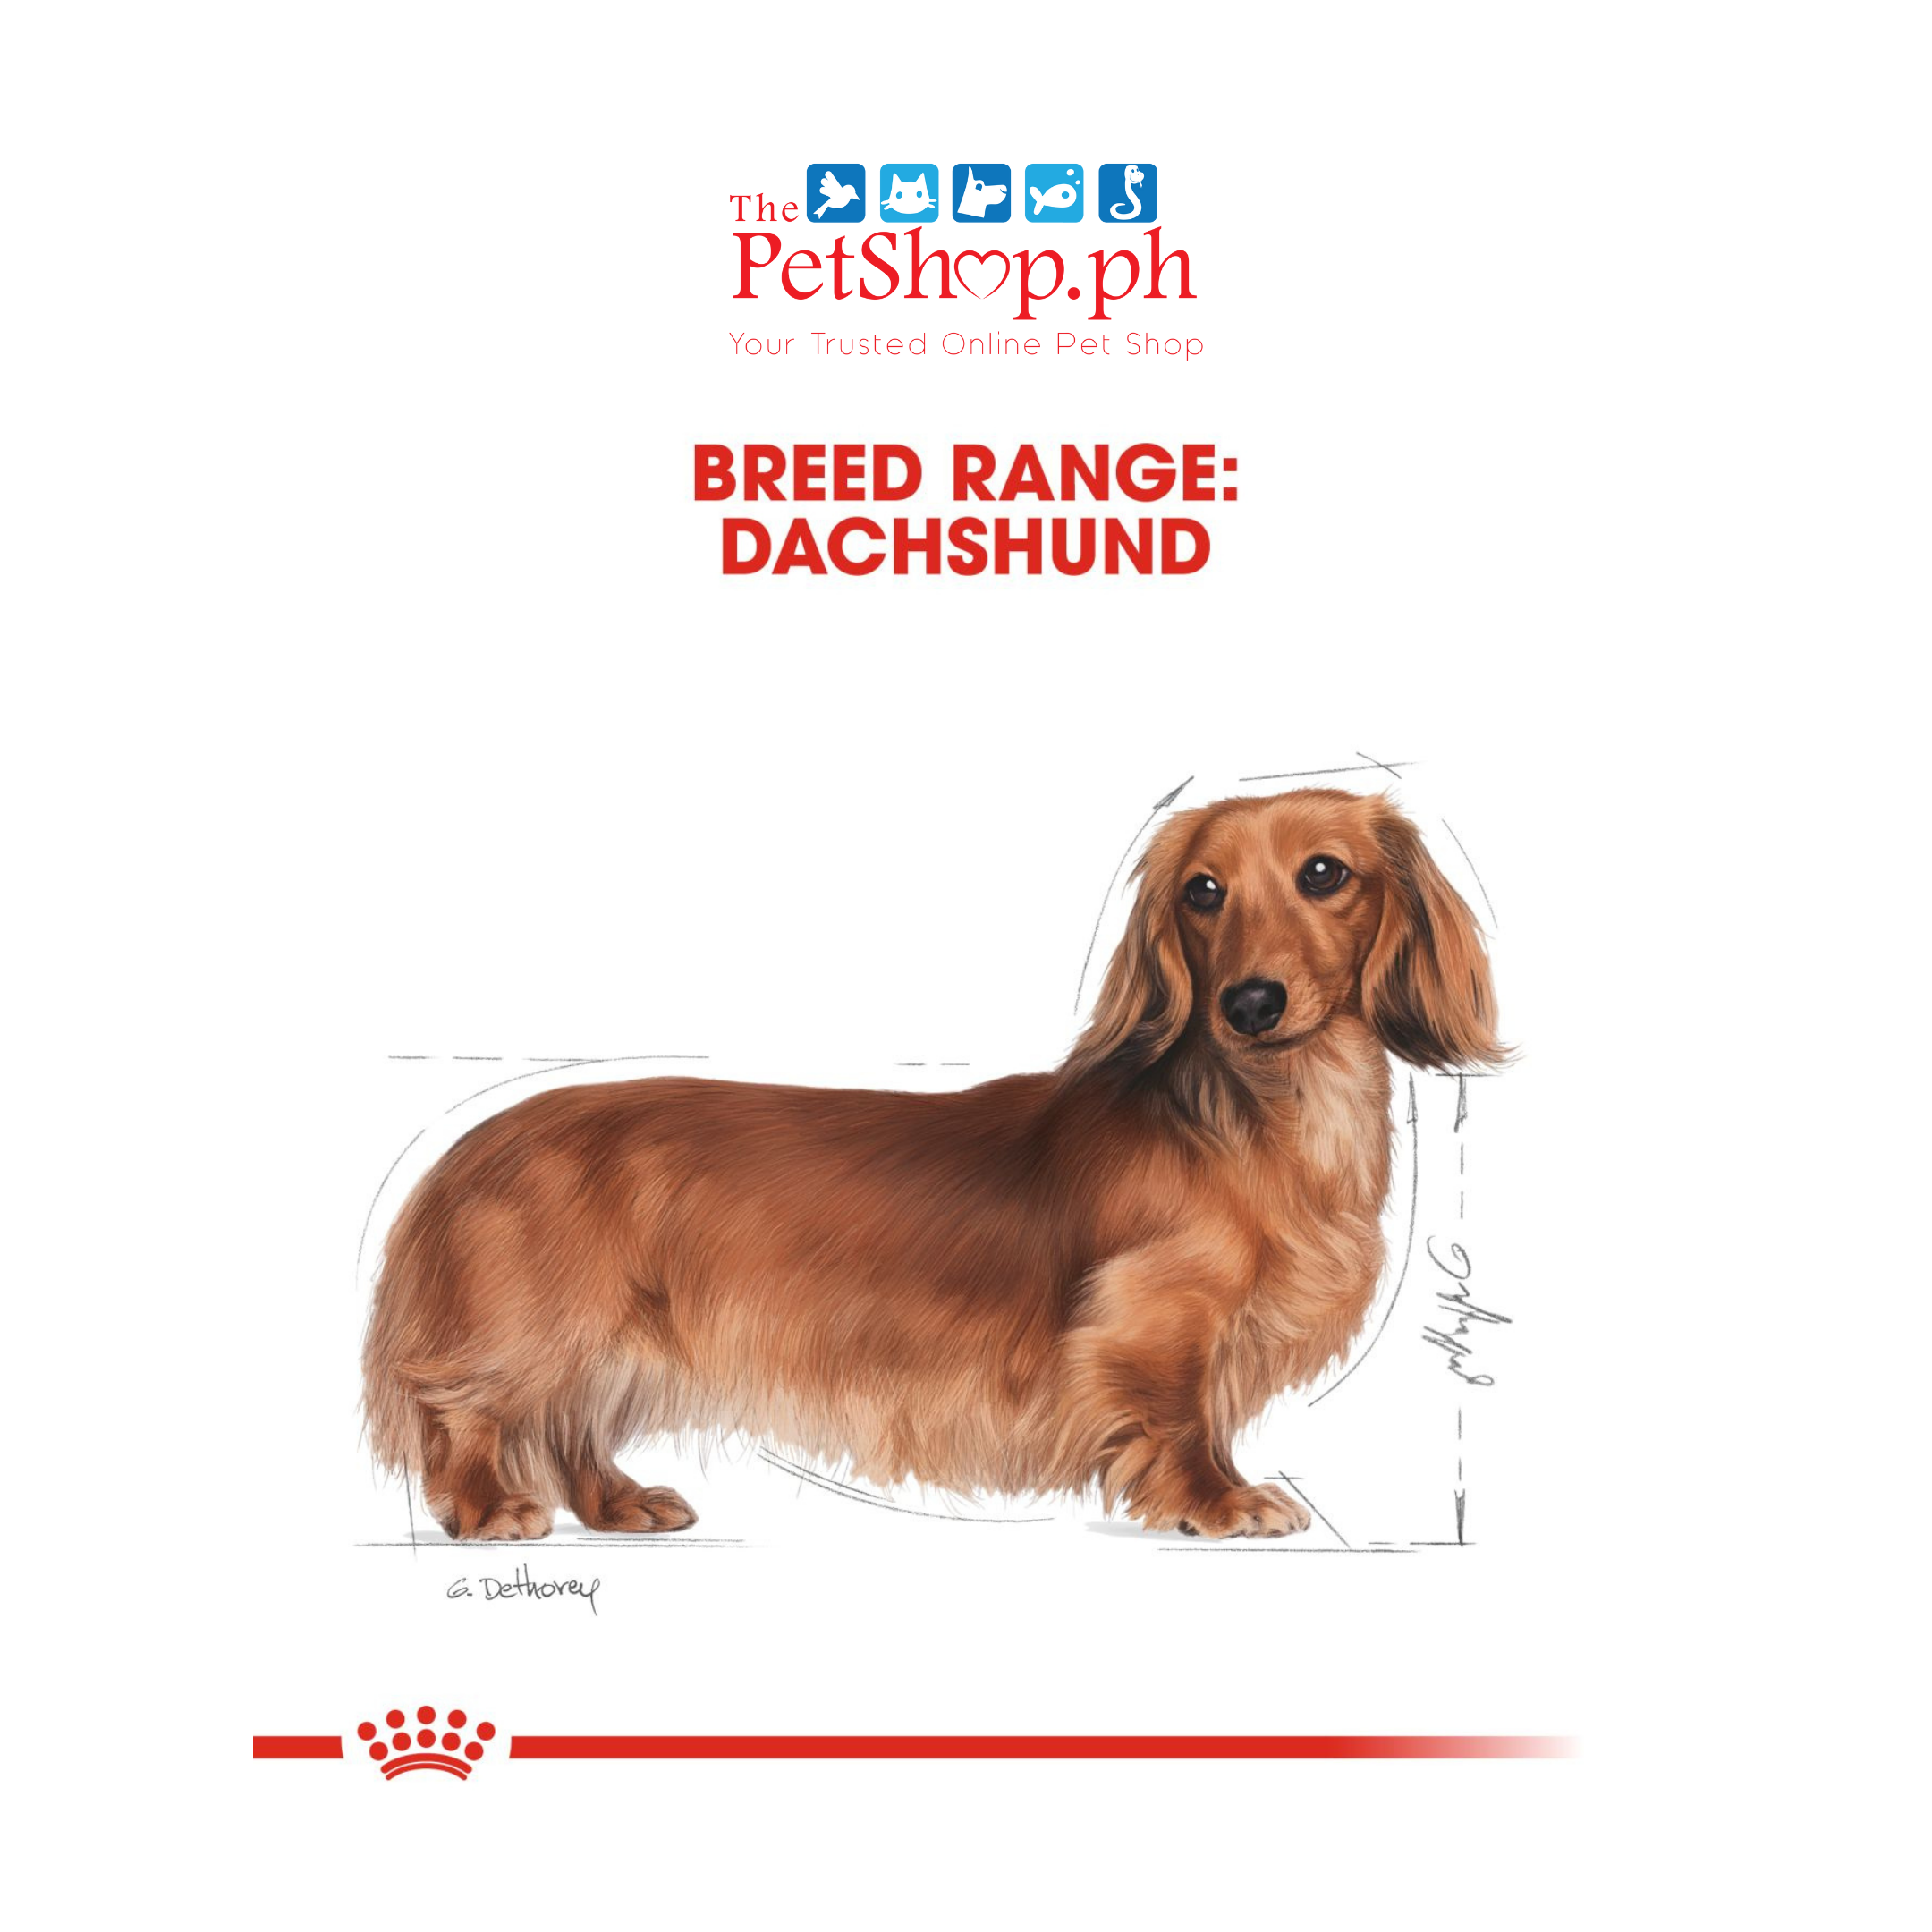 Royal Canin Dachshund Adult 85g - Set of 12 Pouch Wet Dog Food  Breed Health Nutrition